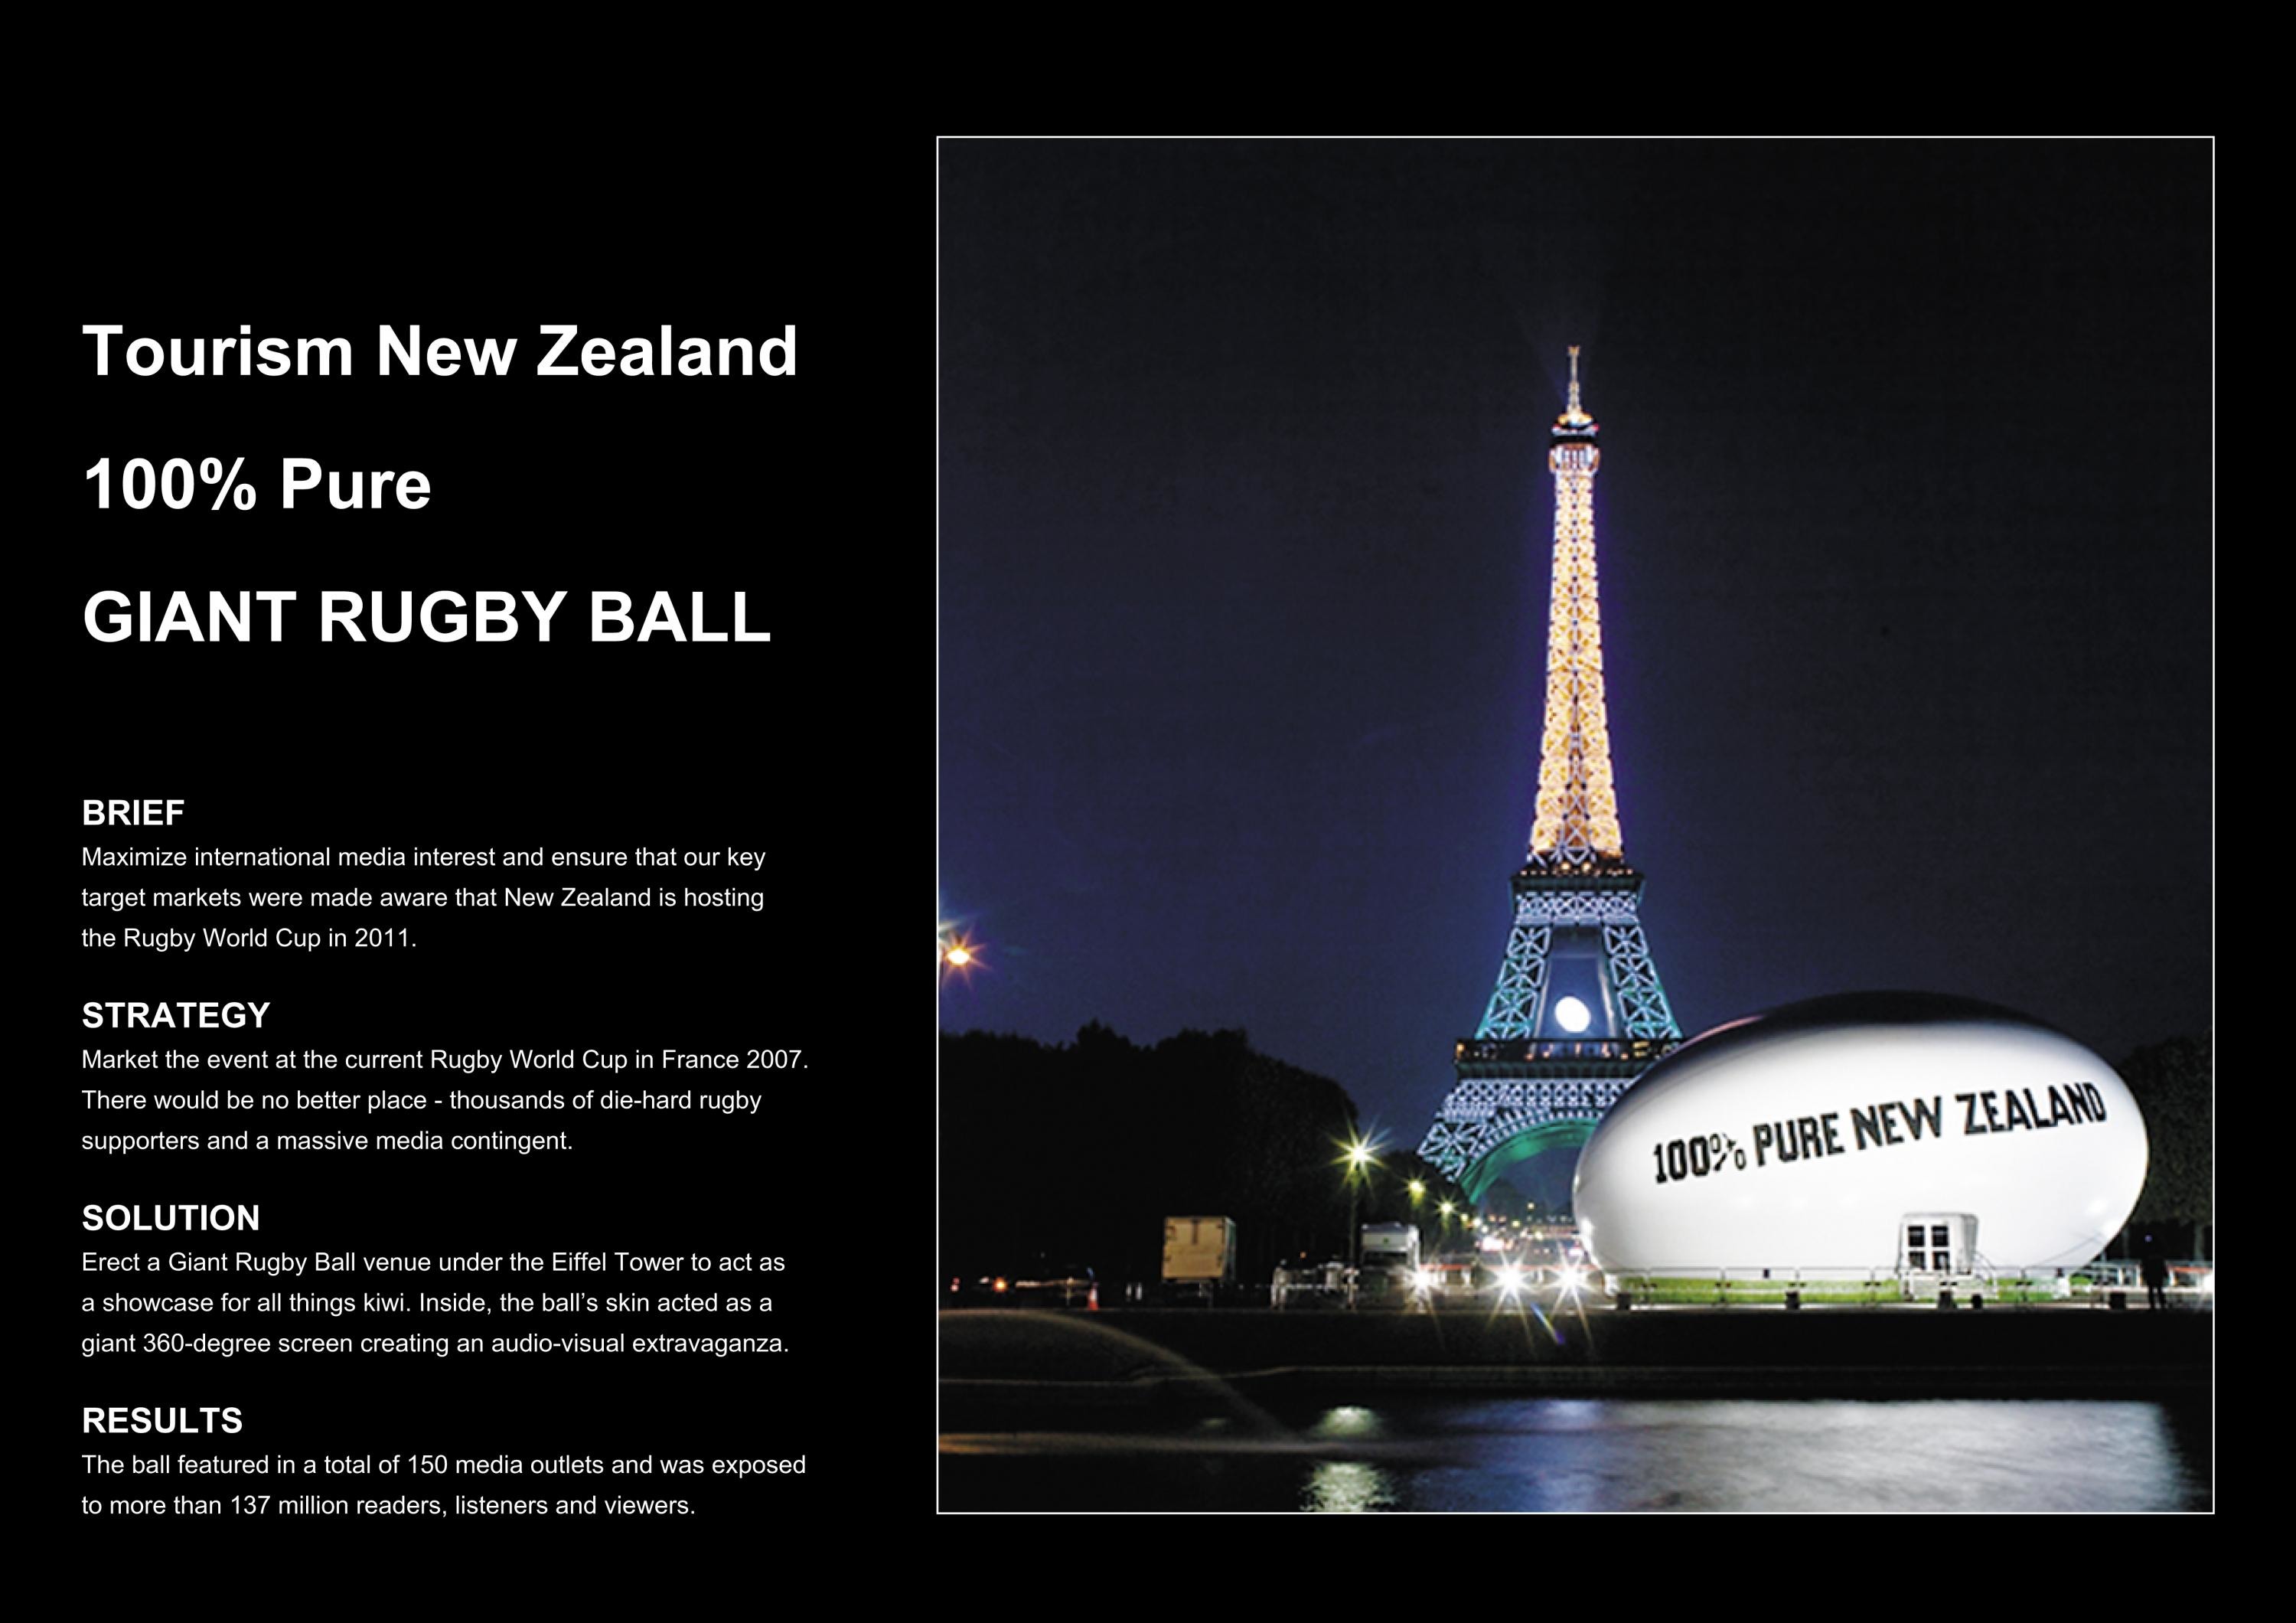 NEW ZEALAND TOURISM - RUGBY CUP 2011